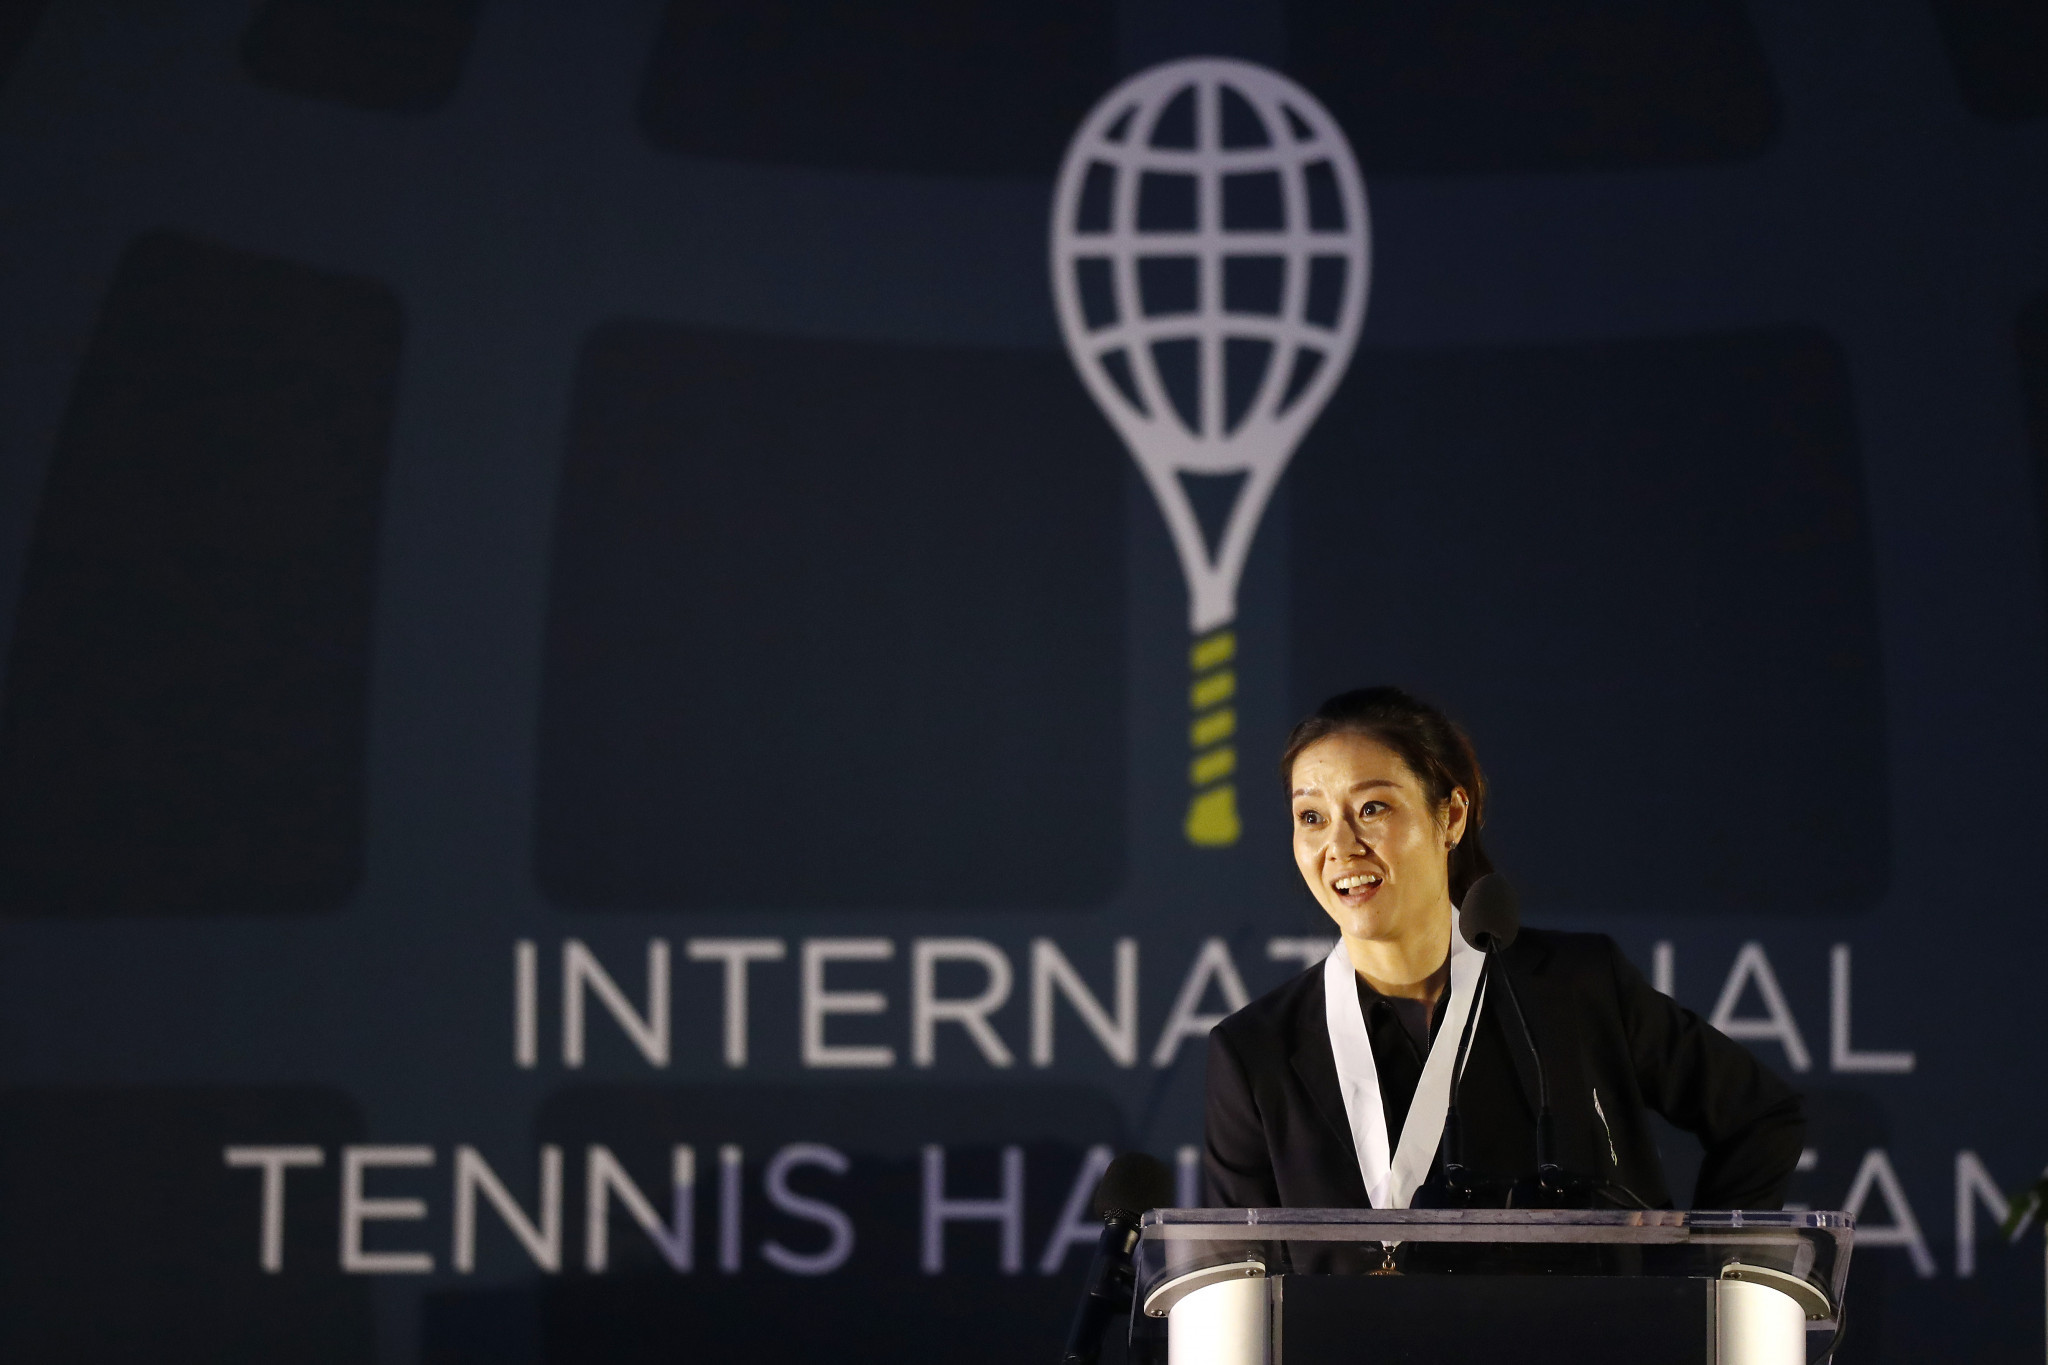 Li Na was elected to the International Tennis Hall of Fame earlier this year ©Getty Images